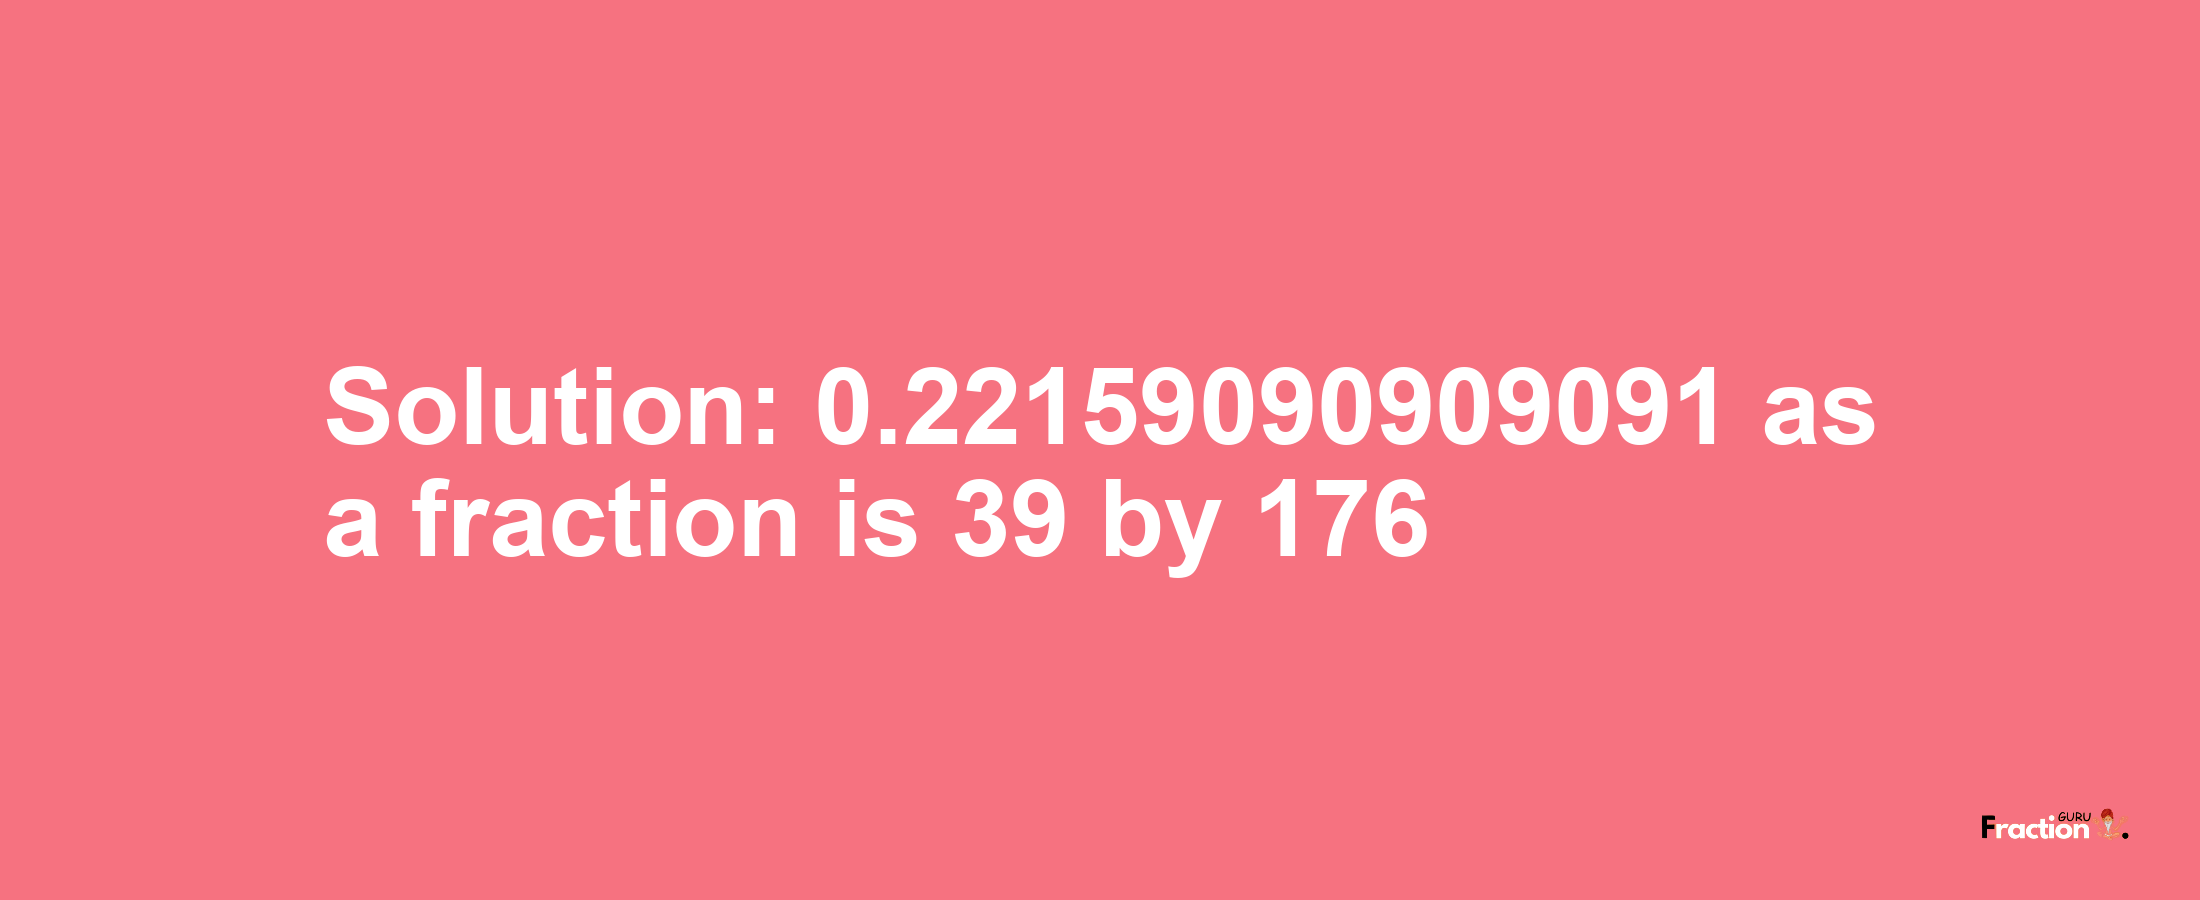 Solution:0.22159090909091 as a fraction is 39/176